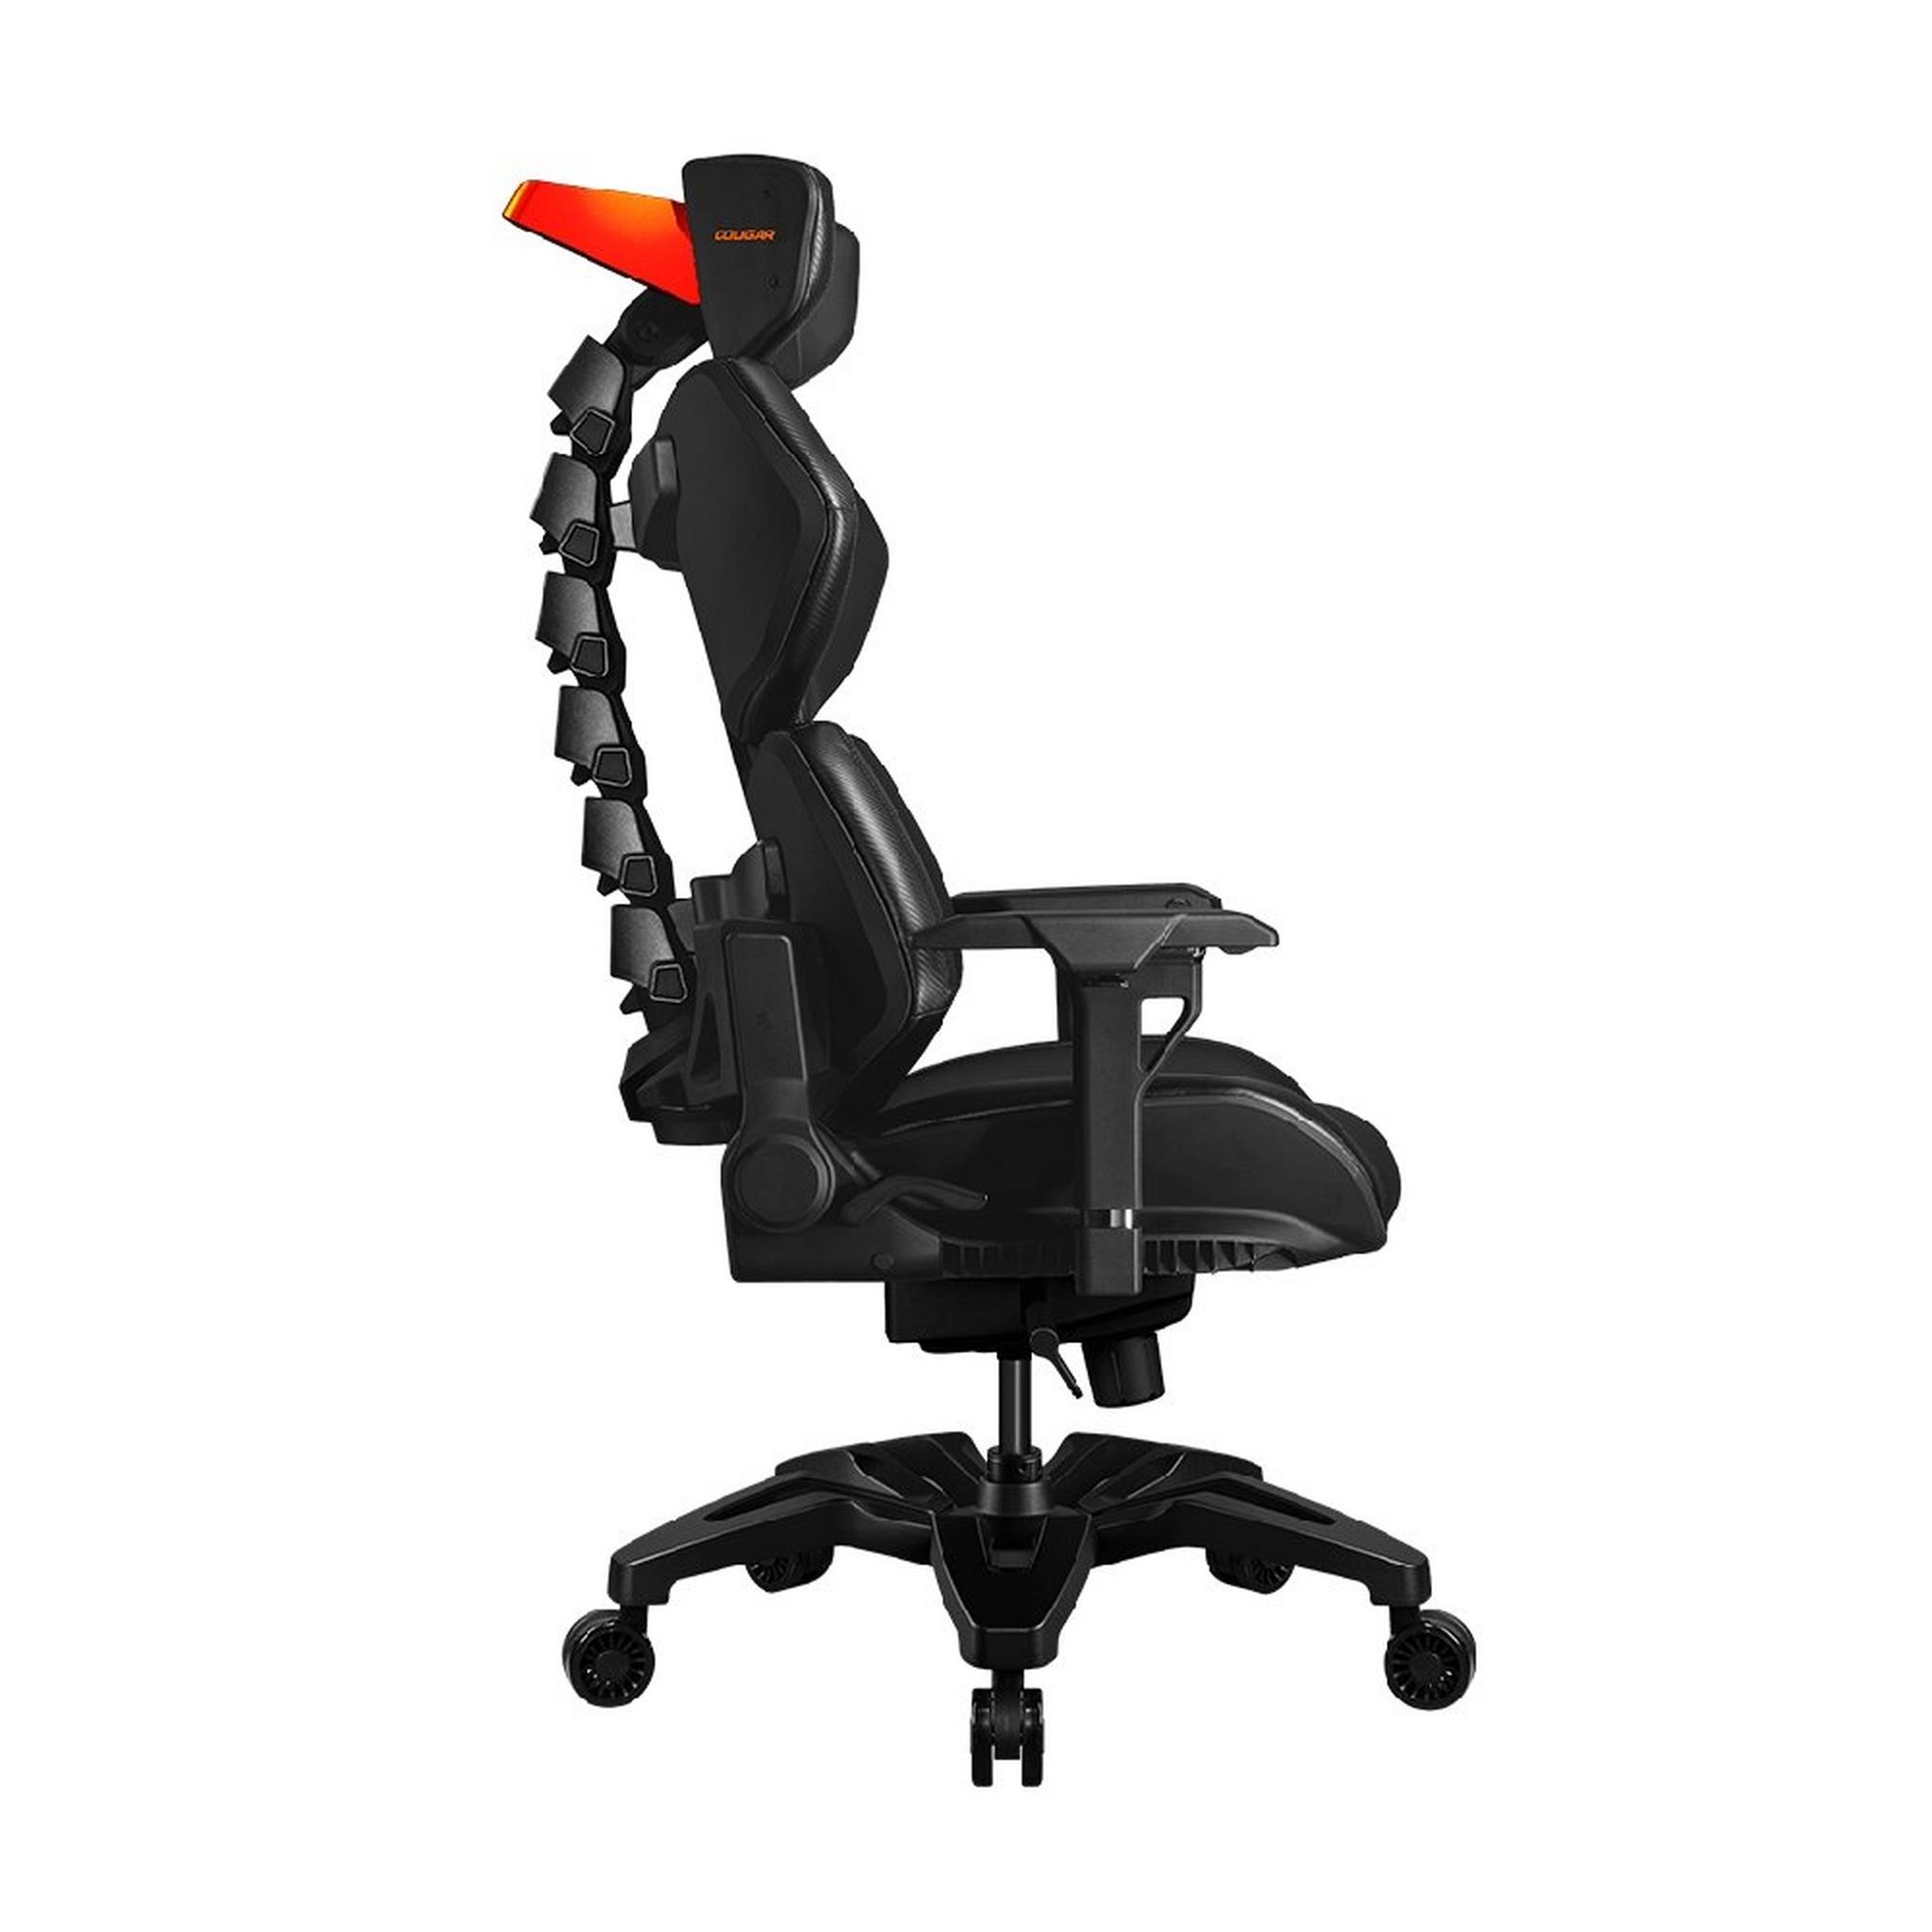 COUGAR Terminator Unprecedented Revolution of the Gaming Chair with Unique Mechanical Aesthetics